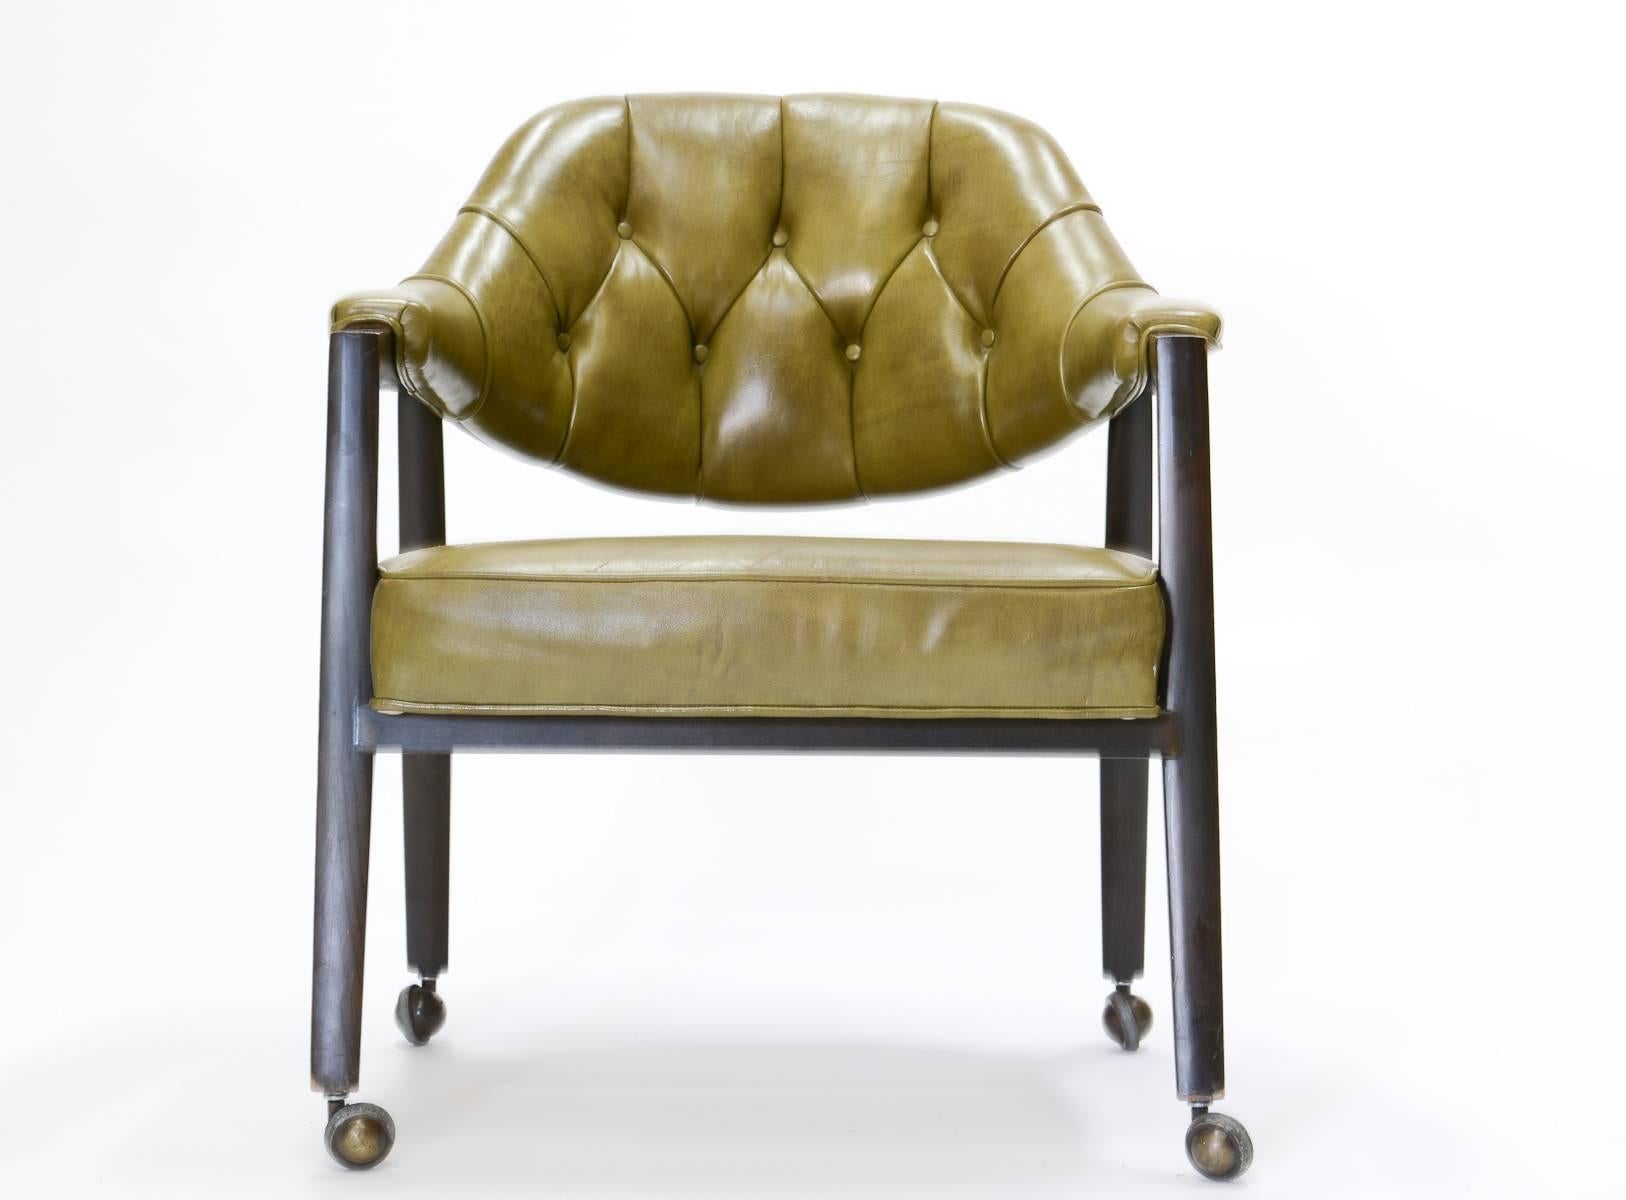 A wonderful set of up to ten Maurice Bailey swivel executive desk chairs in distressed green leather. Eight of the chairs are in green leather and two are in fabric seen in image 8.